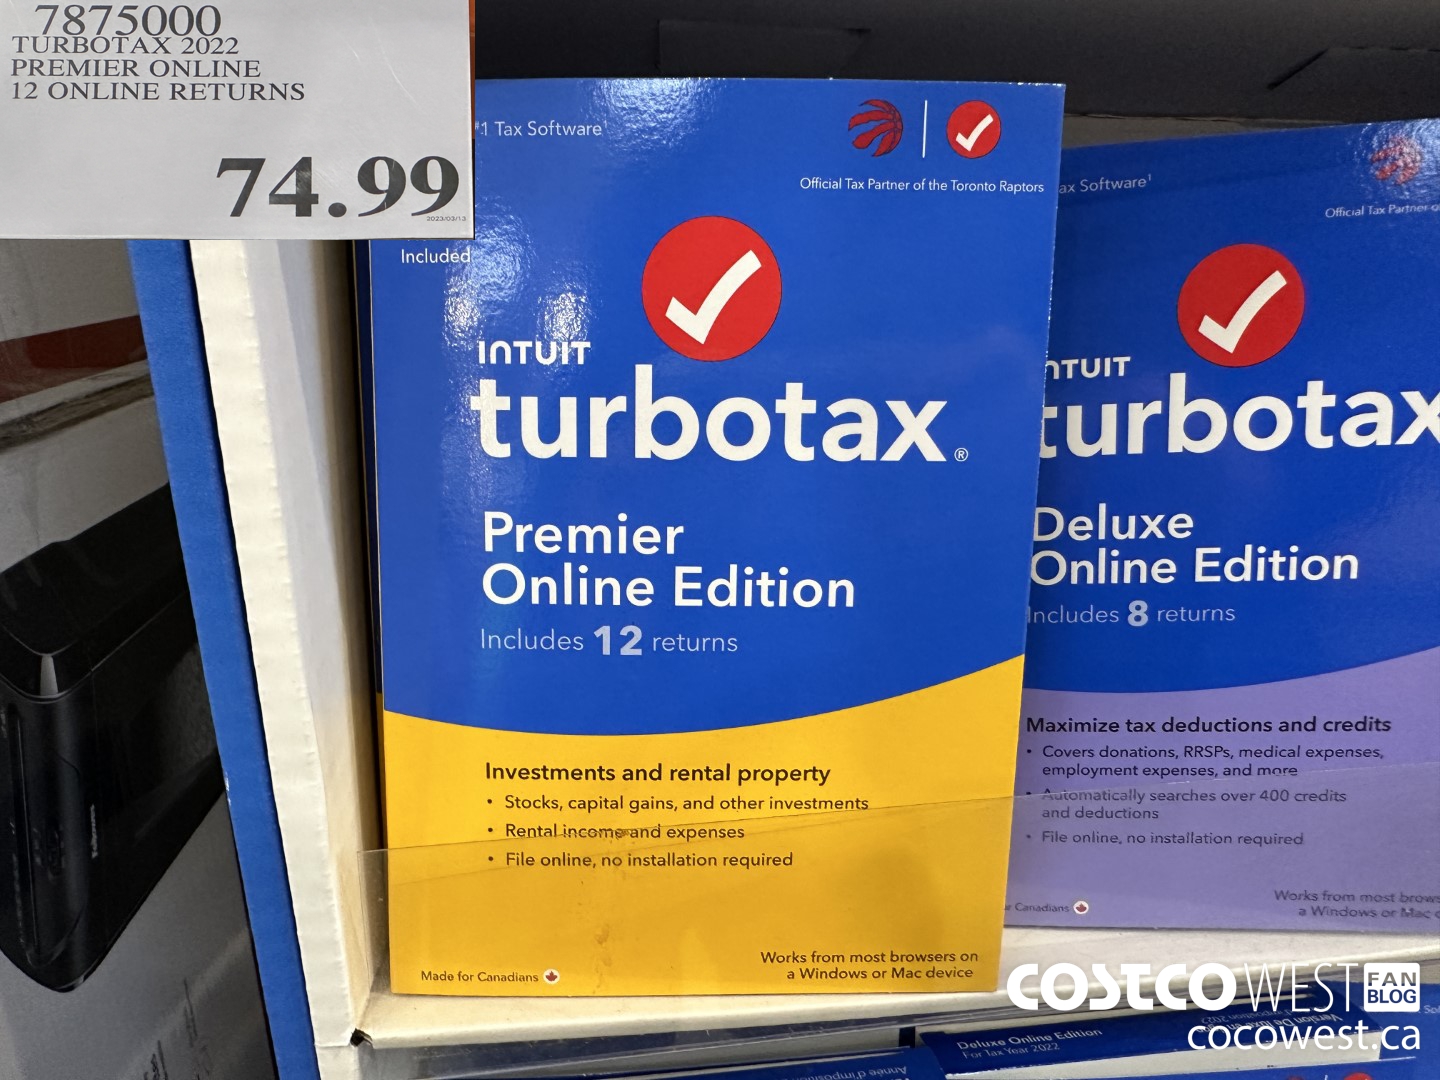 Costco Flyer & Costco Sale Items for Apr 39, 2023 for BC, AB, MB, SK